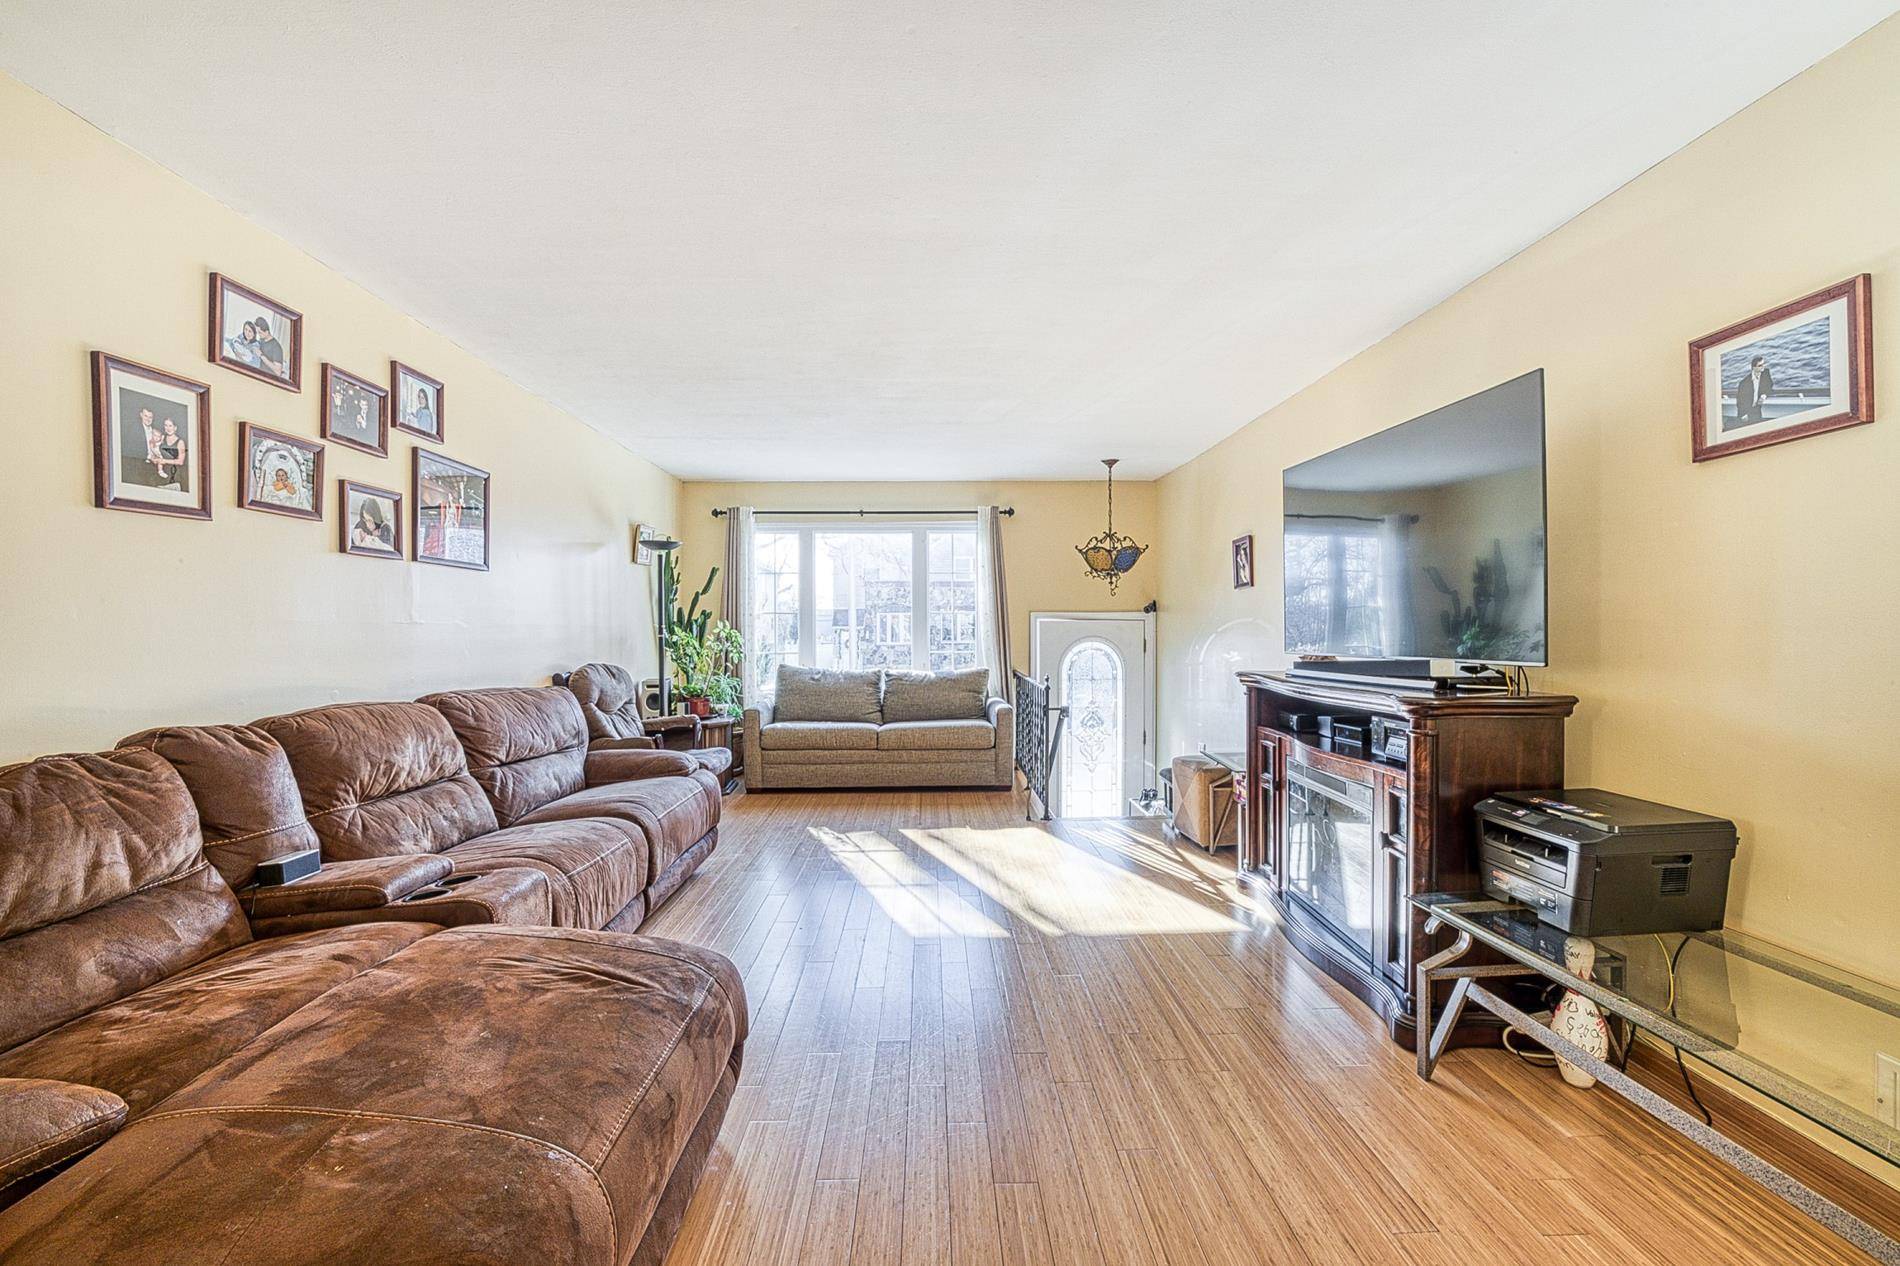 Bring your sunglasses to this bright spacious modernized home in Midland Beach !